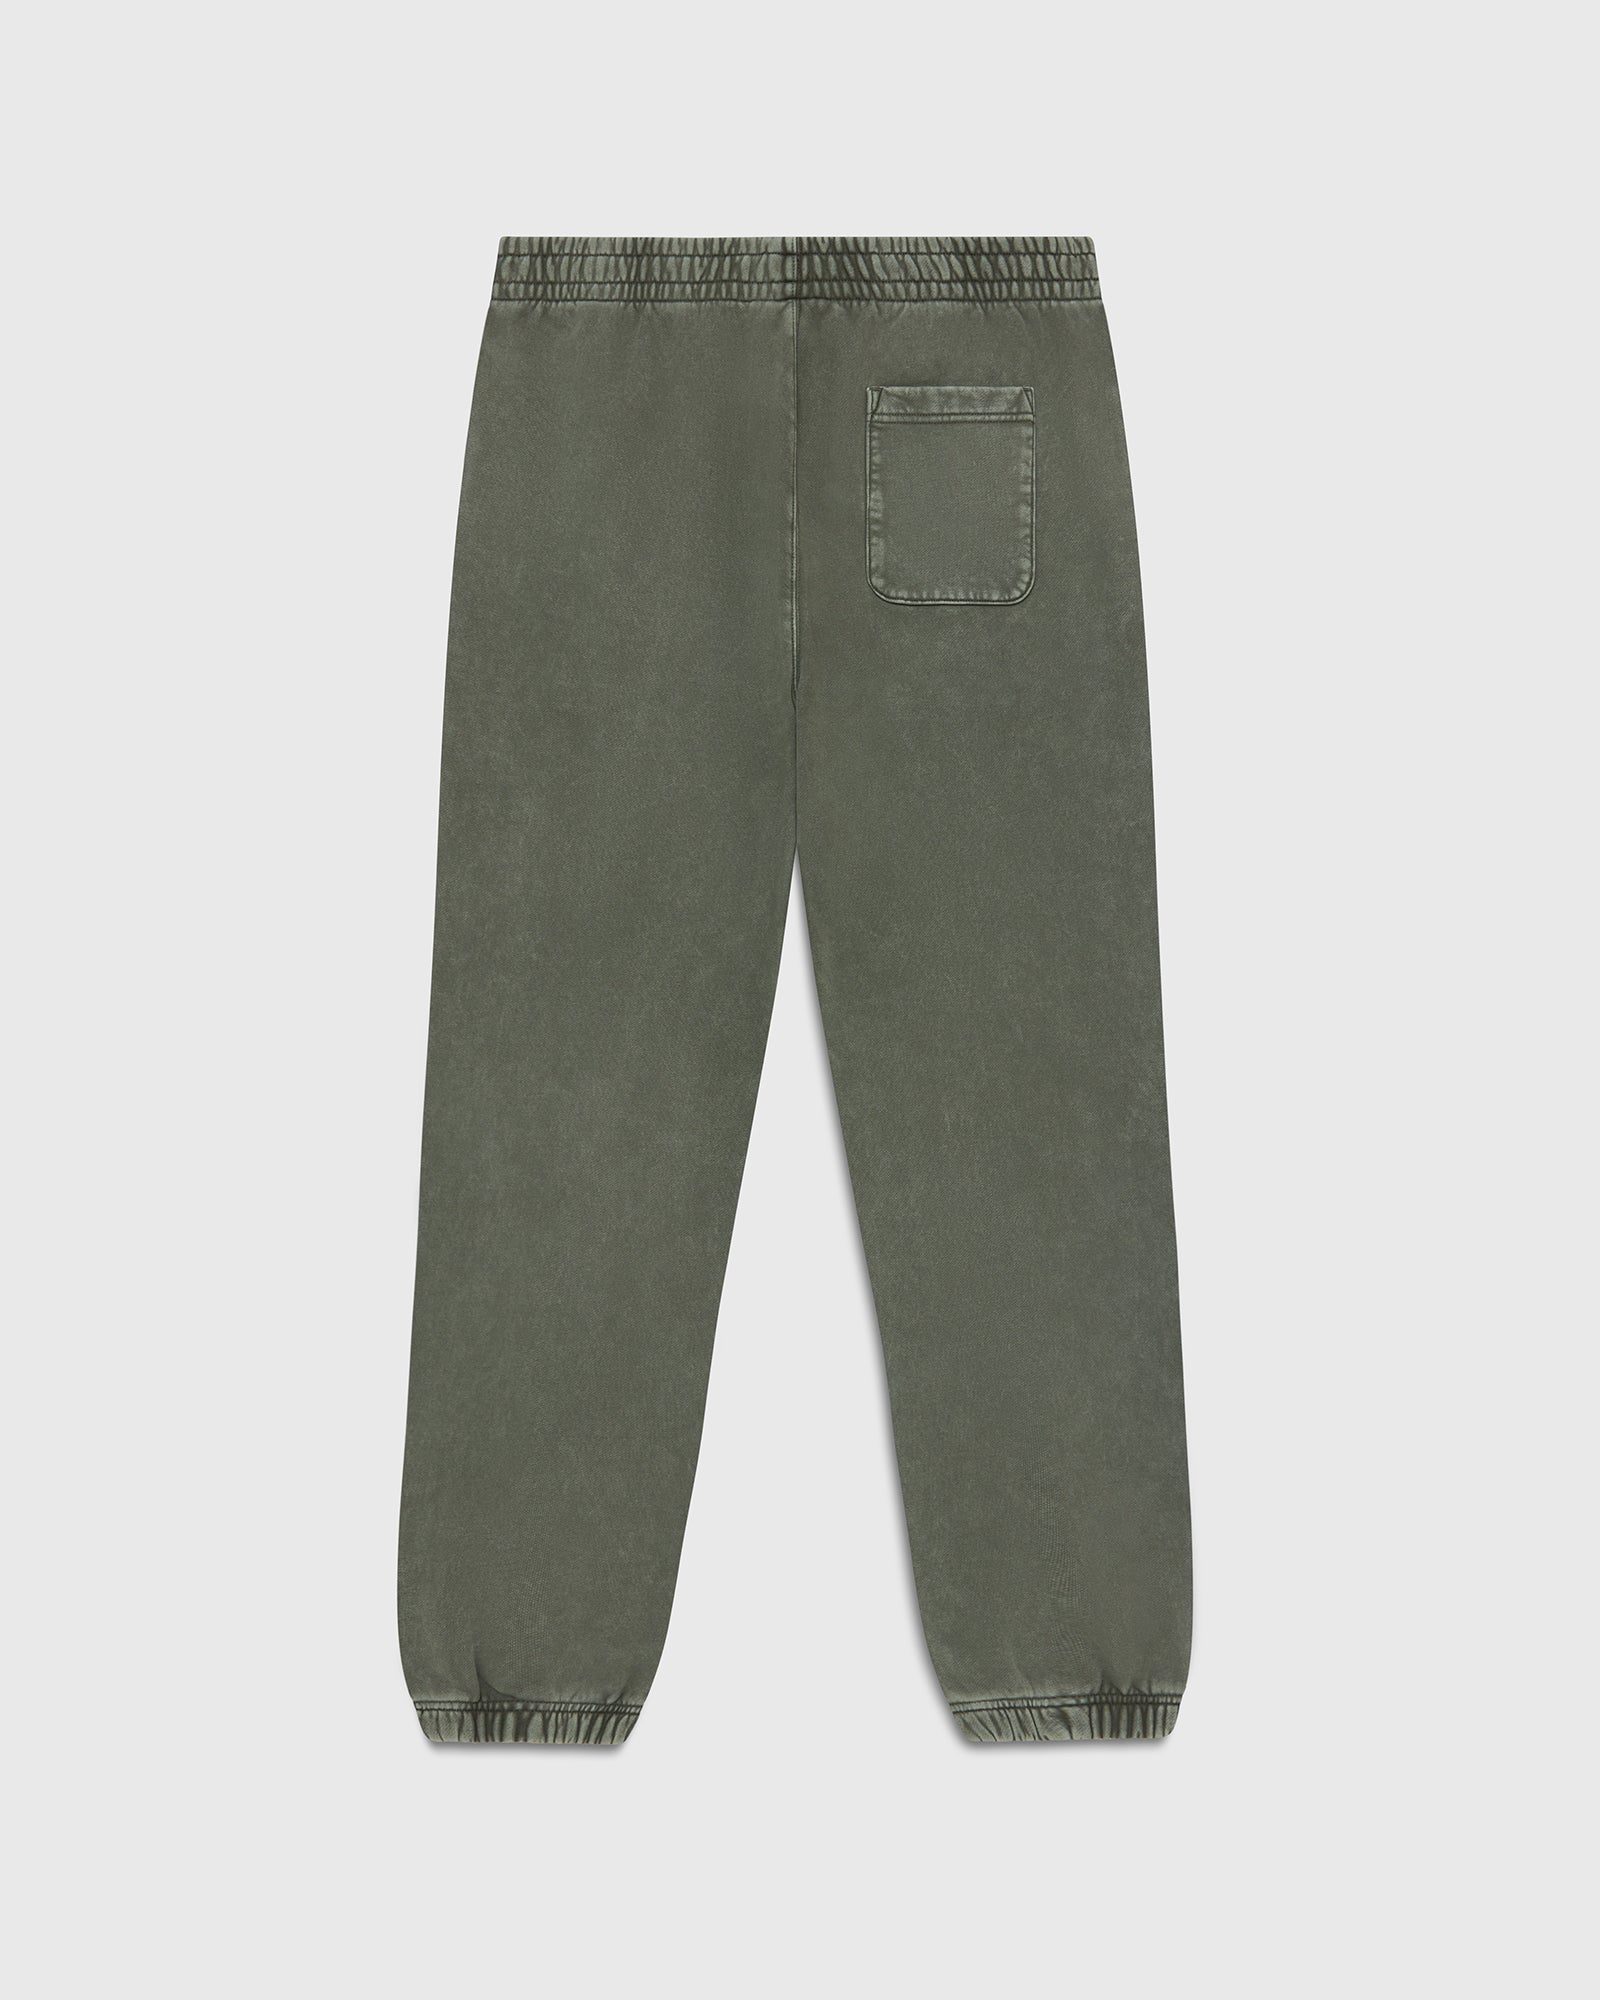 Muskoka Garment Dyed Relaxed Fit Sweatpant - Sage